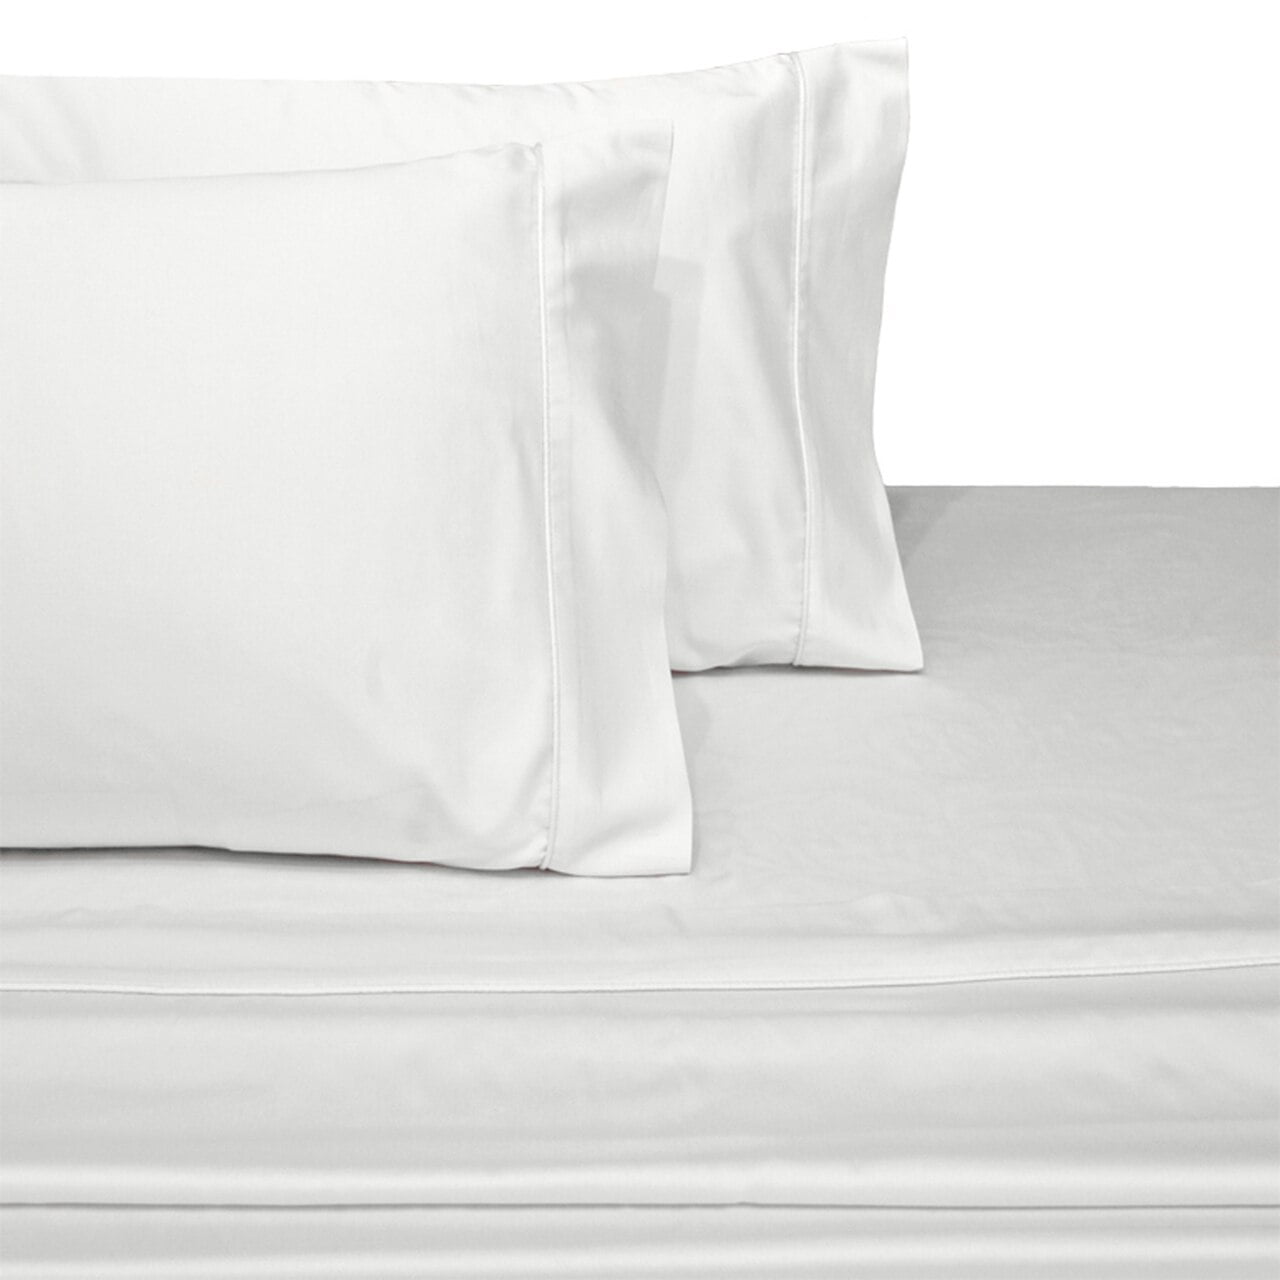 Details about   100% Cotton Bed Sheet Set 600 TC Queen/King Sizes Solid Light Grey Solid Sheets 